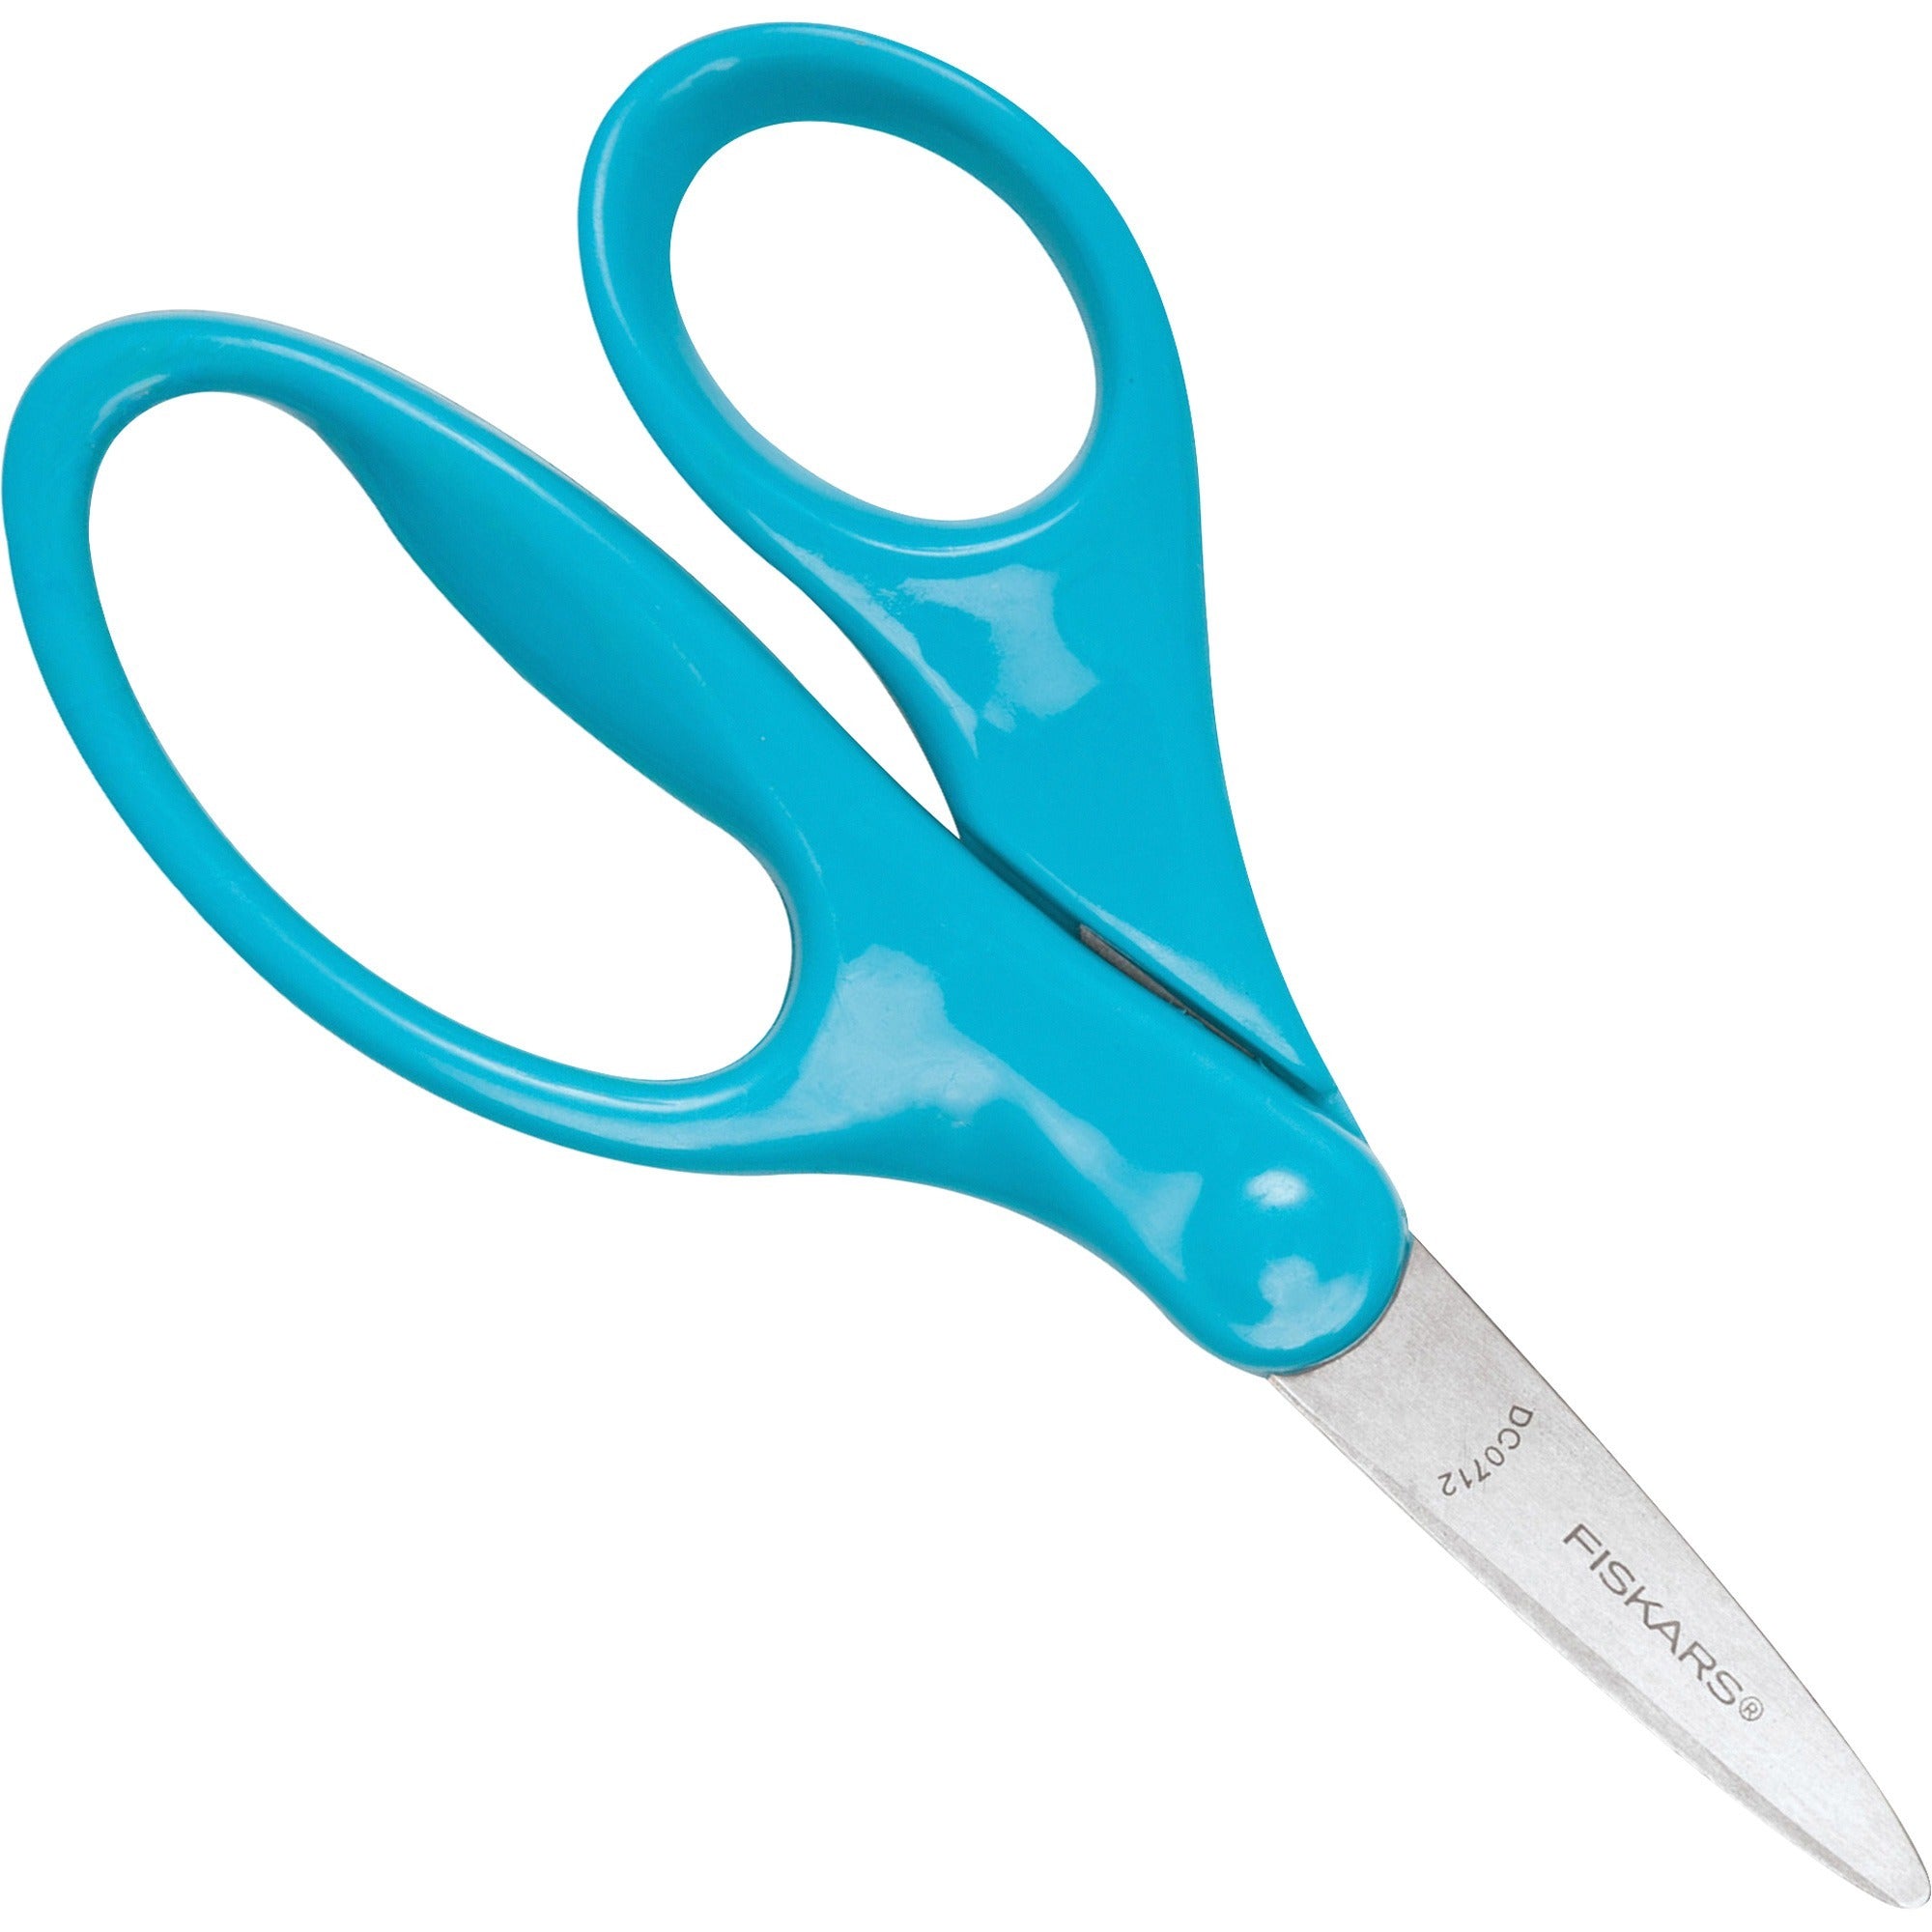 fiskars-5-pointed-tip-kids-scissors-5-overall-lengthsafety-edge-blade-pointed-tip-turquoise-1-each_fsk1943001067 - 1